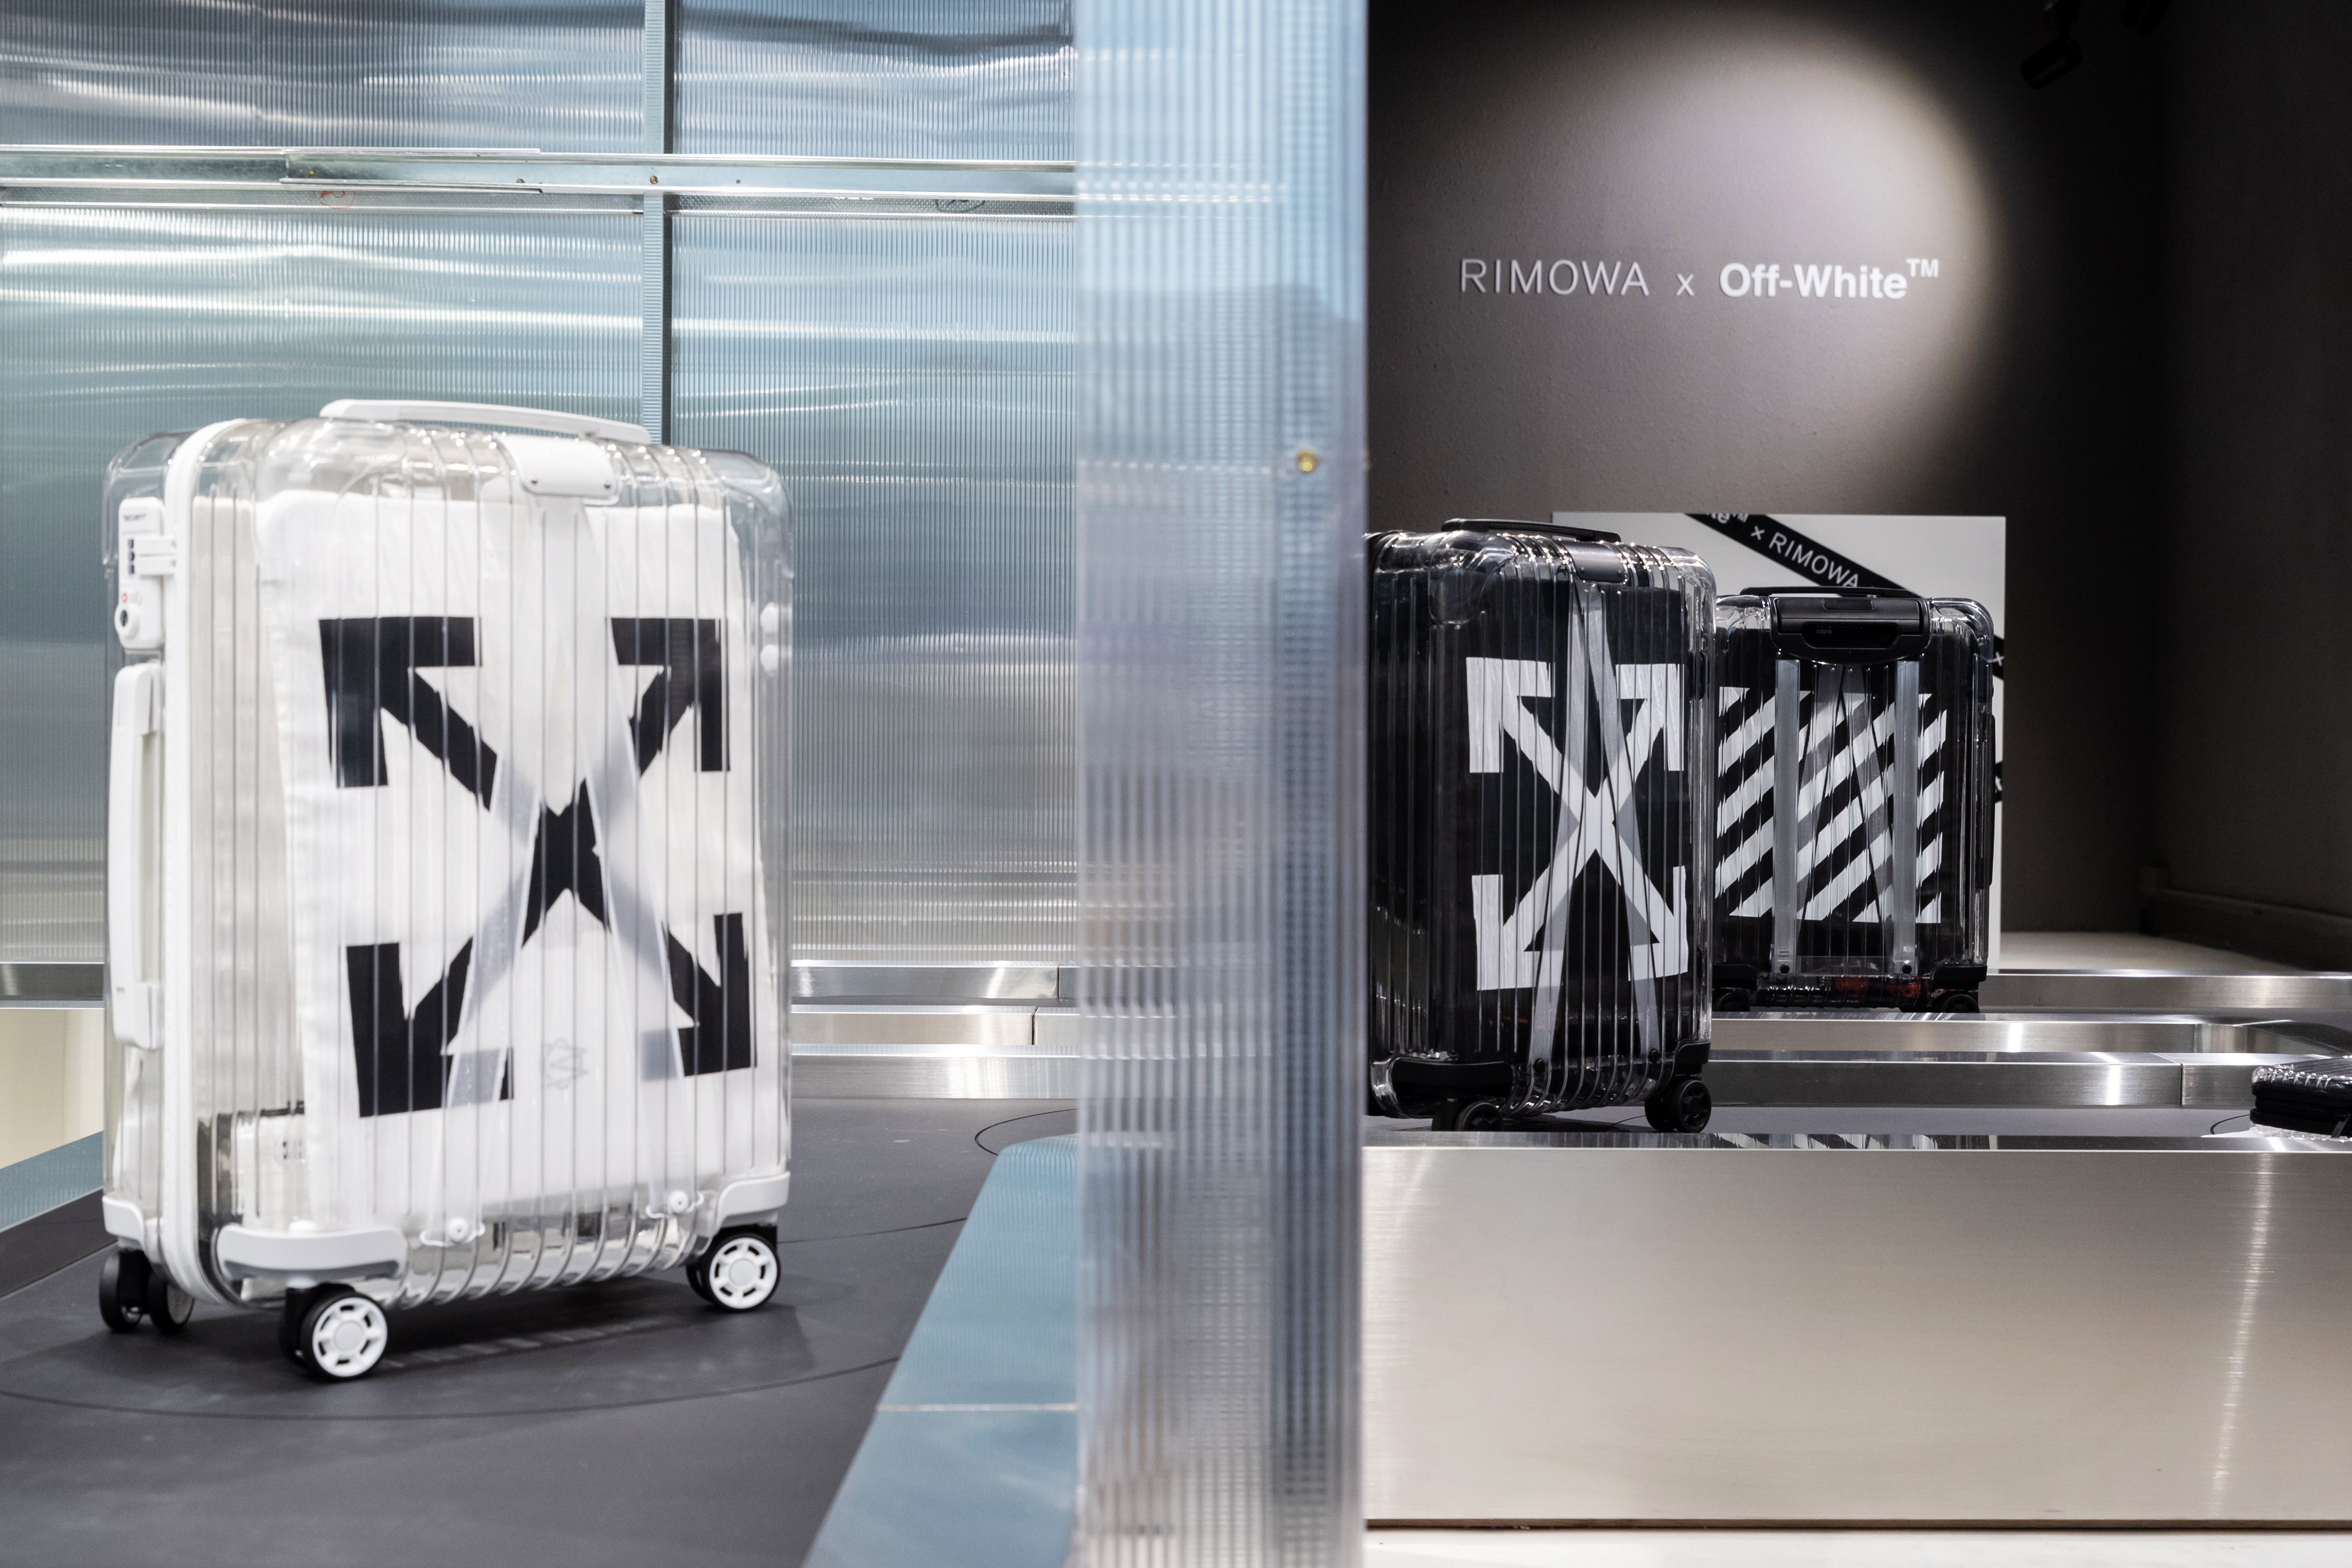 RIMOWA announces a collaboration with the streetwear label OFF